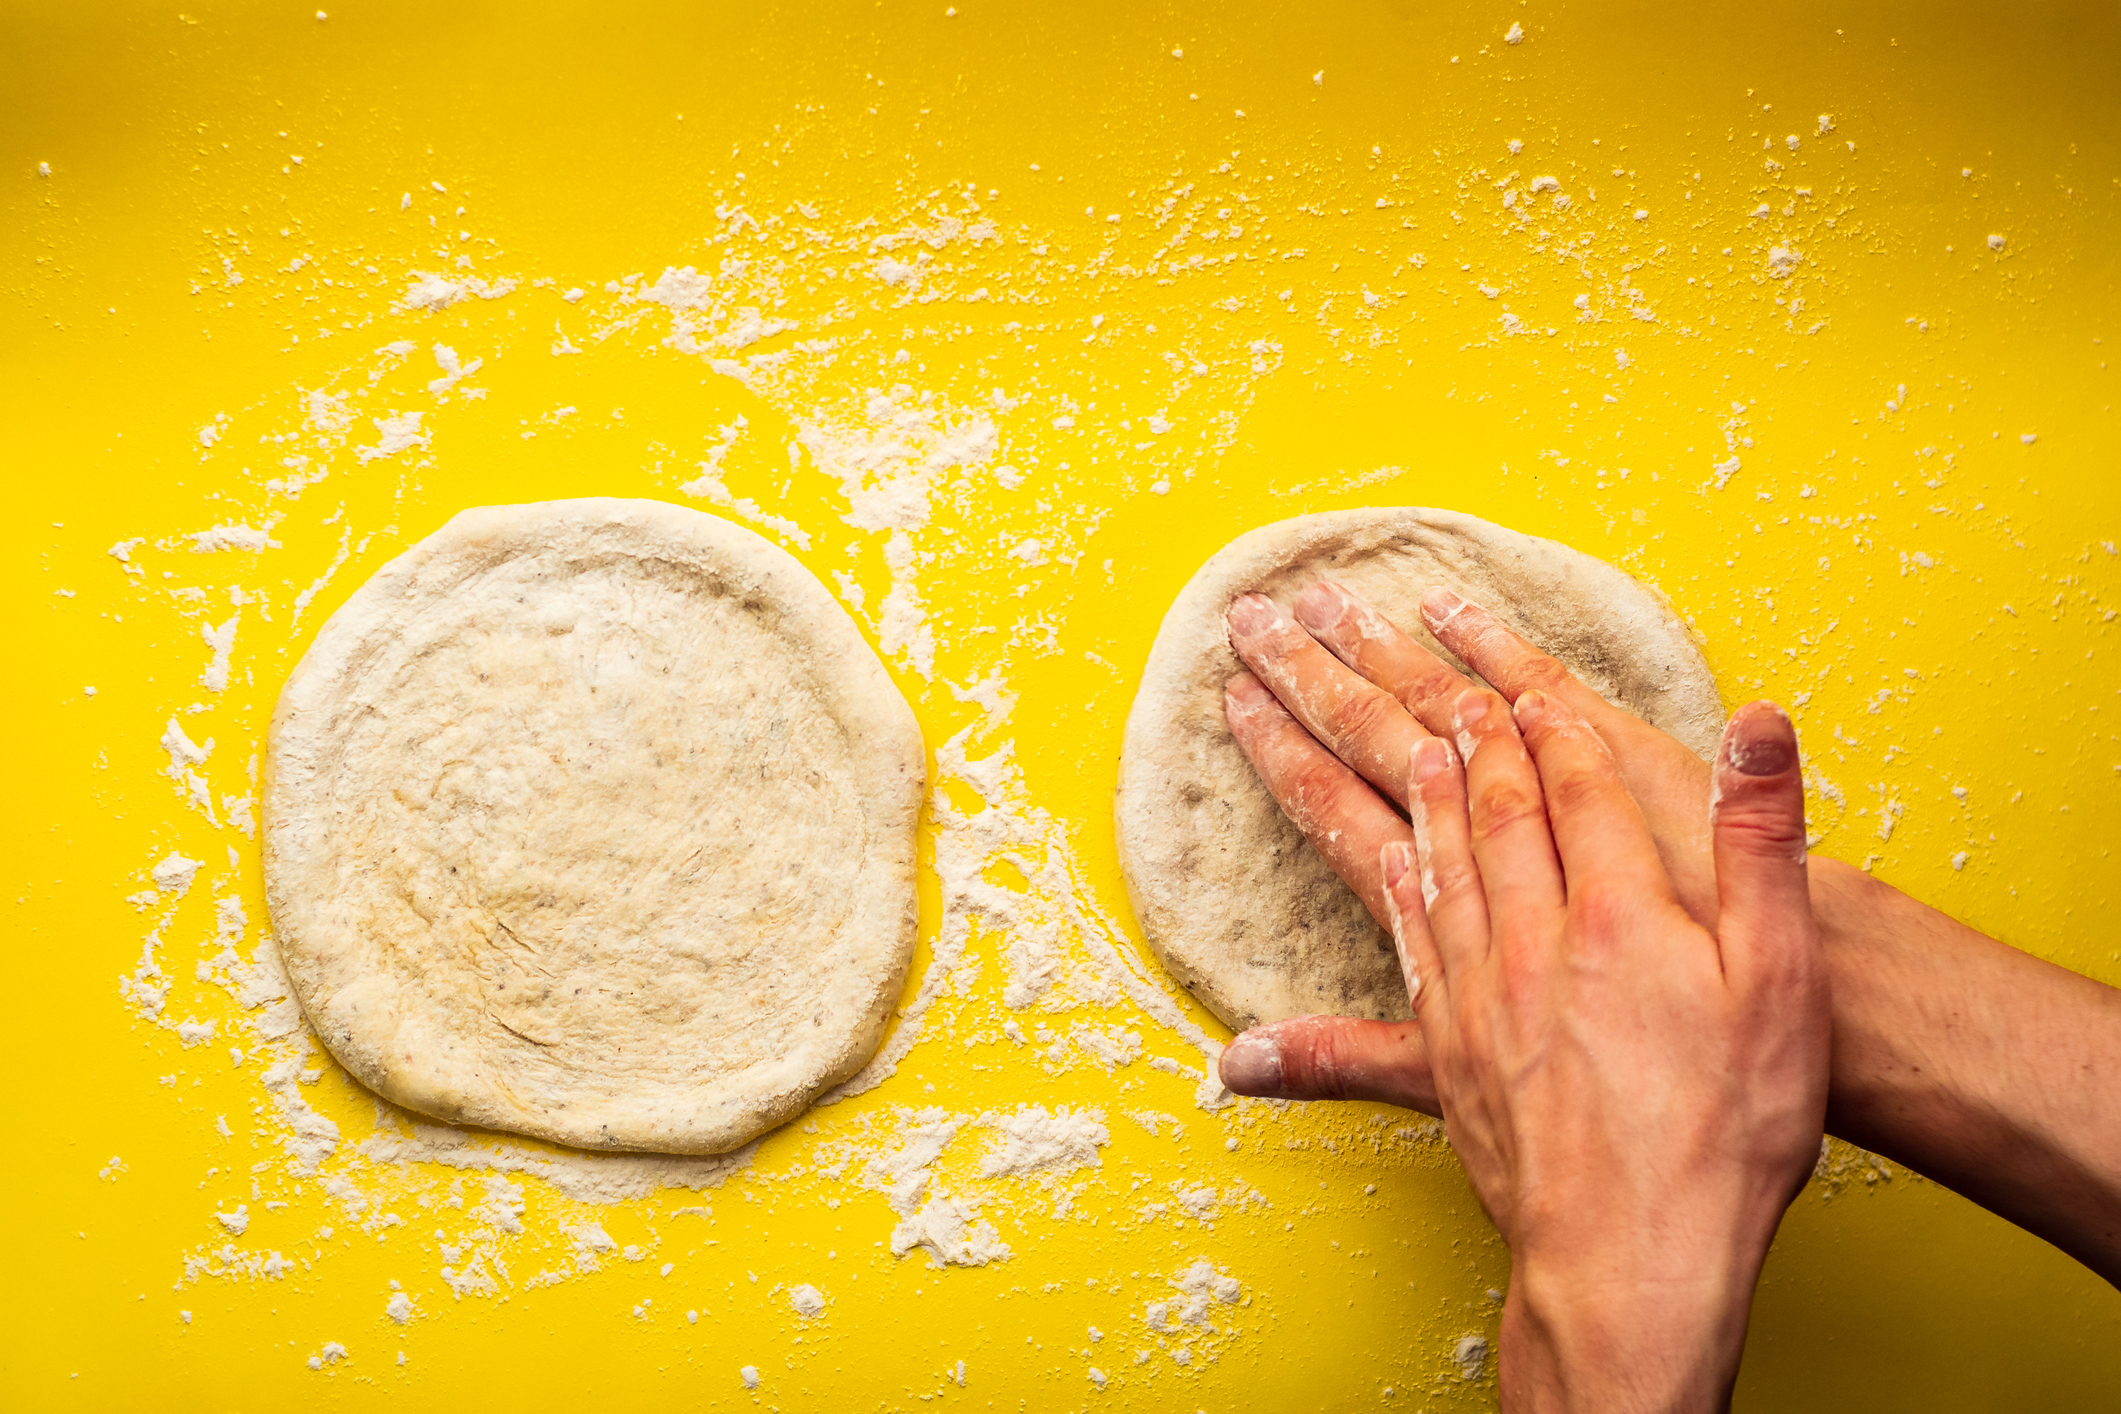 Hands pressing dough on a yellow surface, scattered with flour, for bread or pizza making